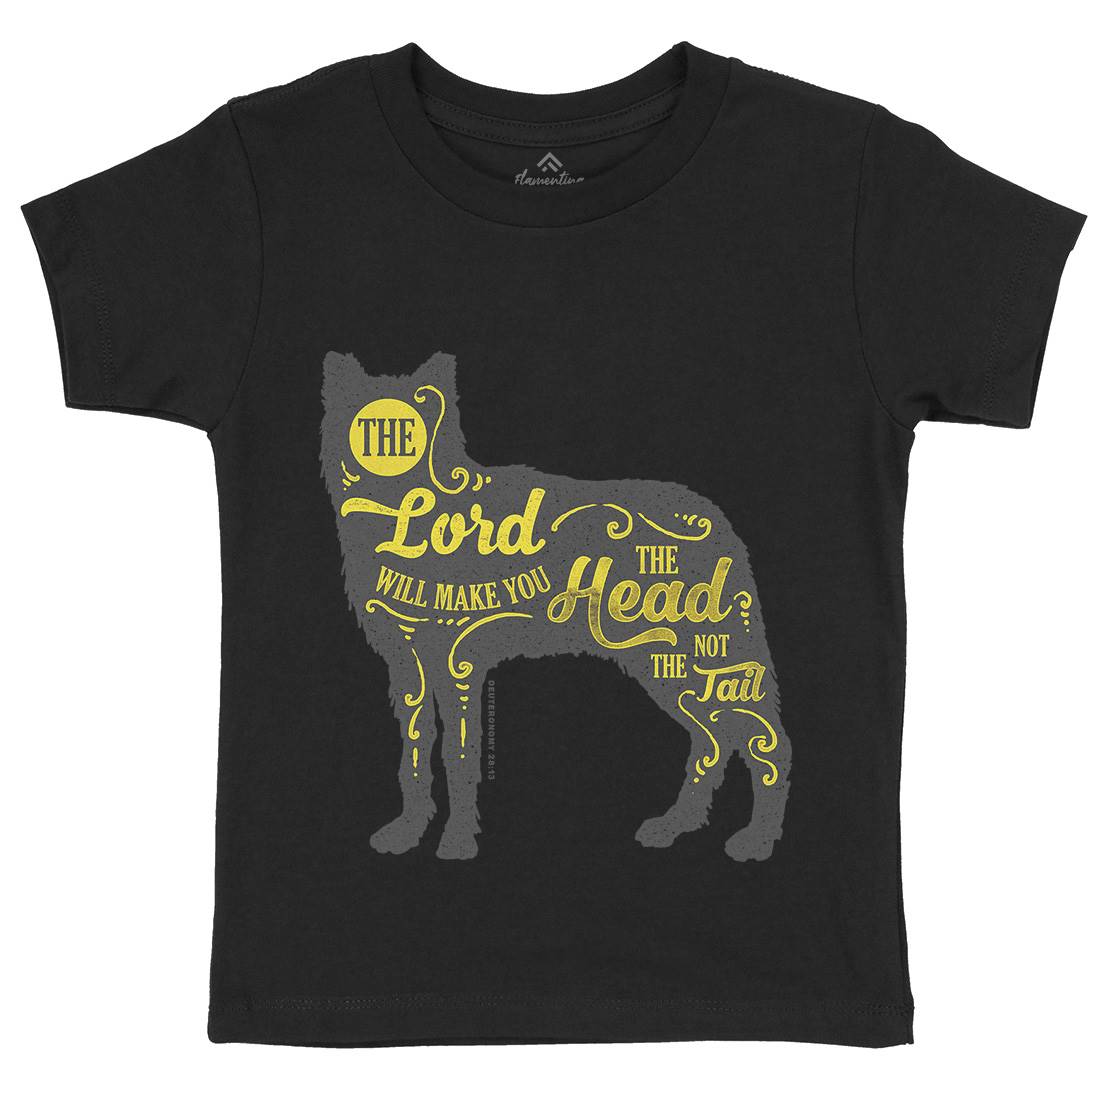 Head Not The Tail Kids Crew Neck T-Shirt Religion A326